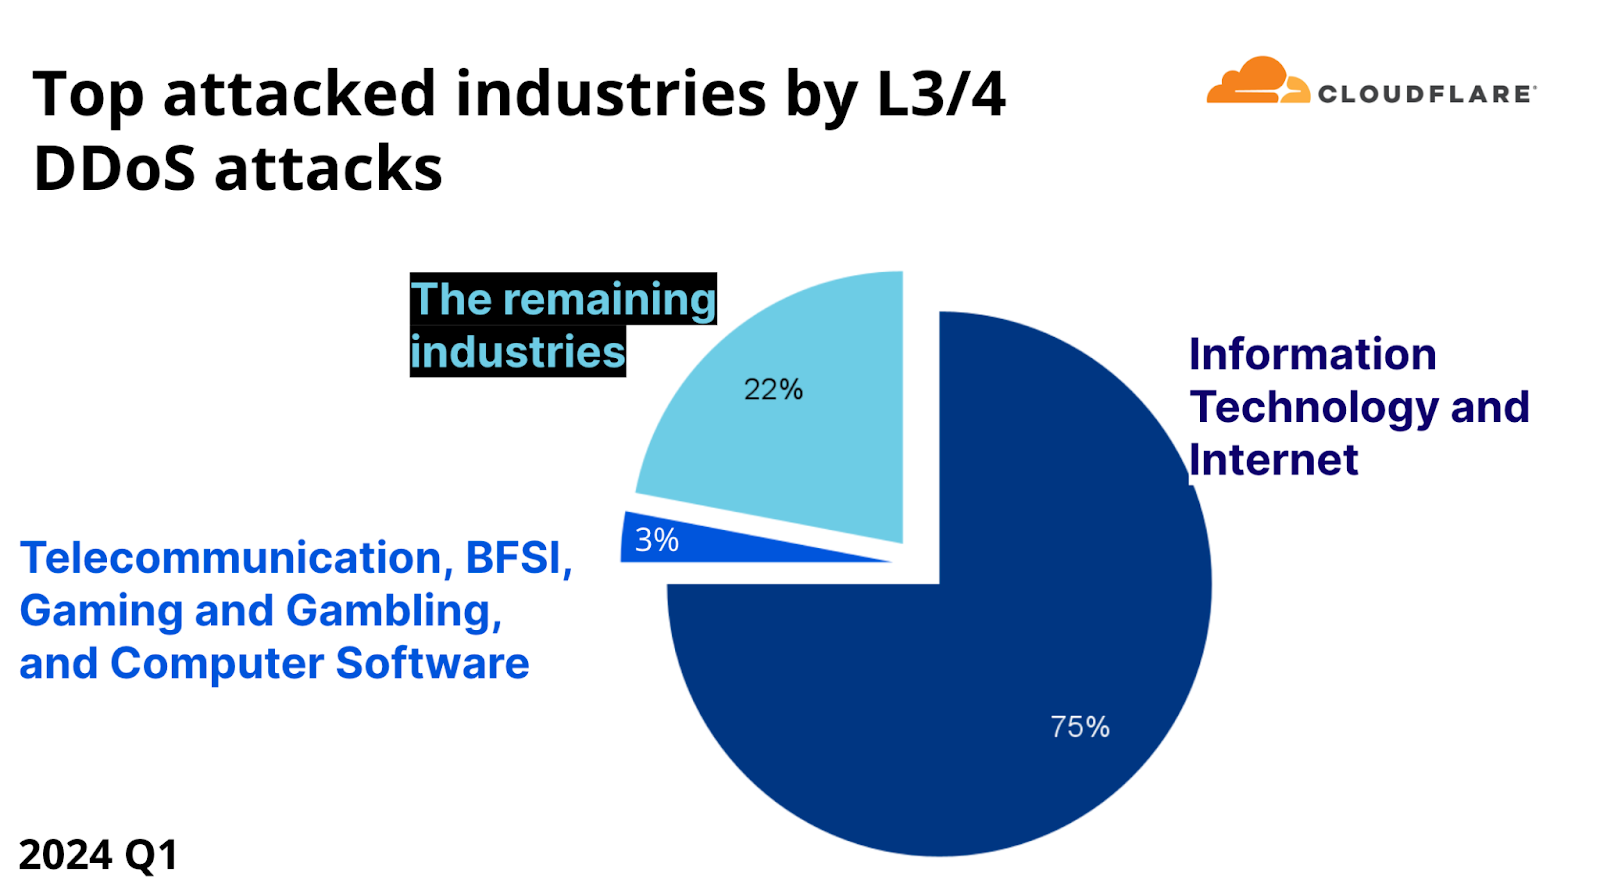 Top attacked industries by L3/4 DDoS attacks